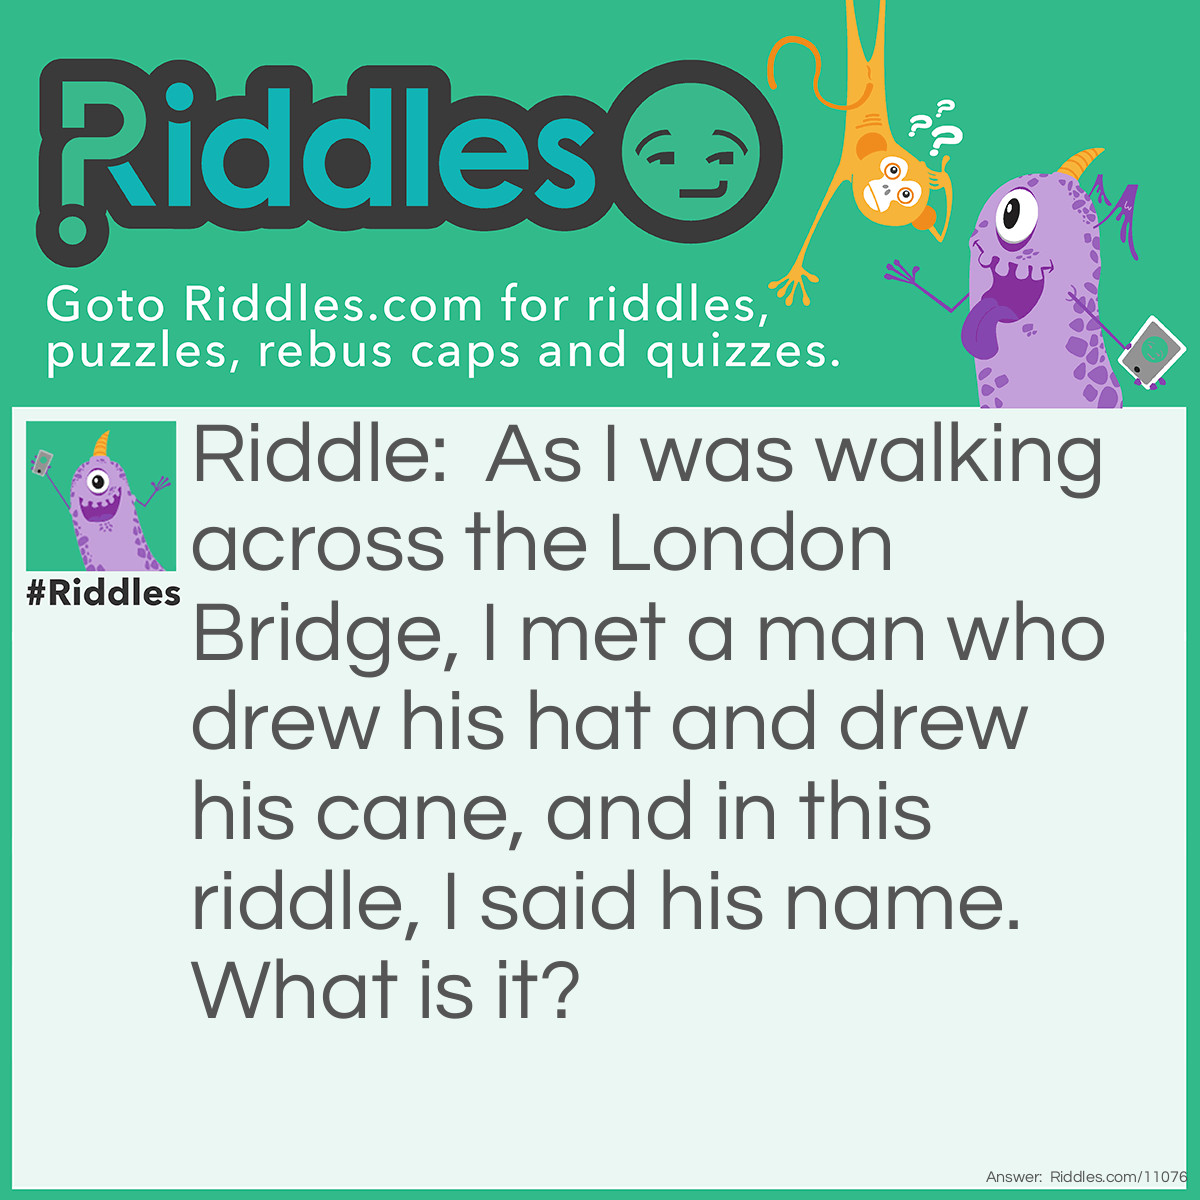 Riddle: As I was walking across the London Bridge, I met a man who drew his hat and drew his cane, and in this riddle, I said his name. What is it? Answer: His name is Andrew.